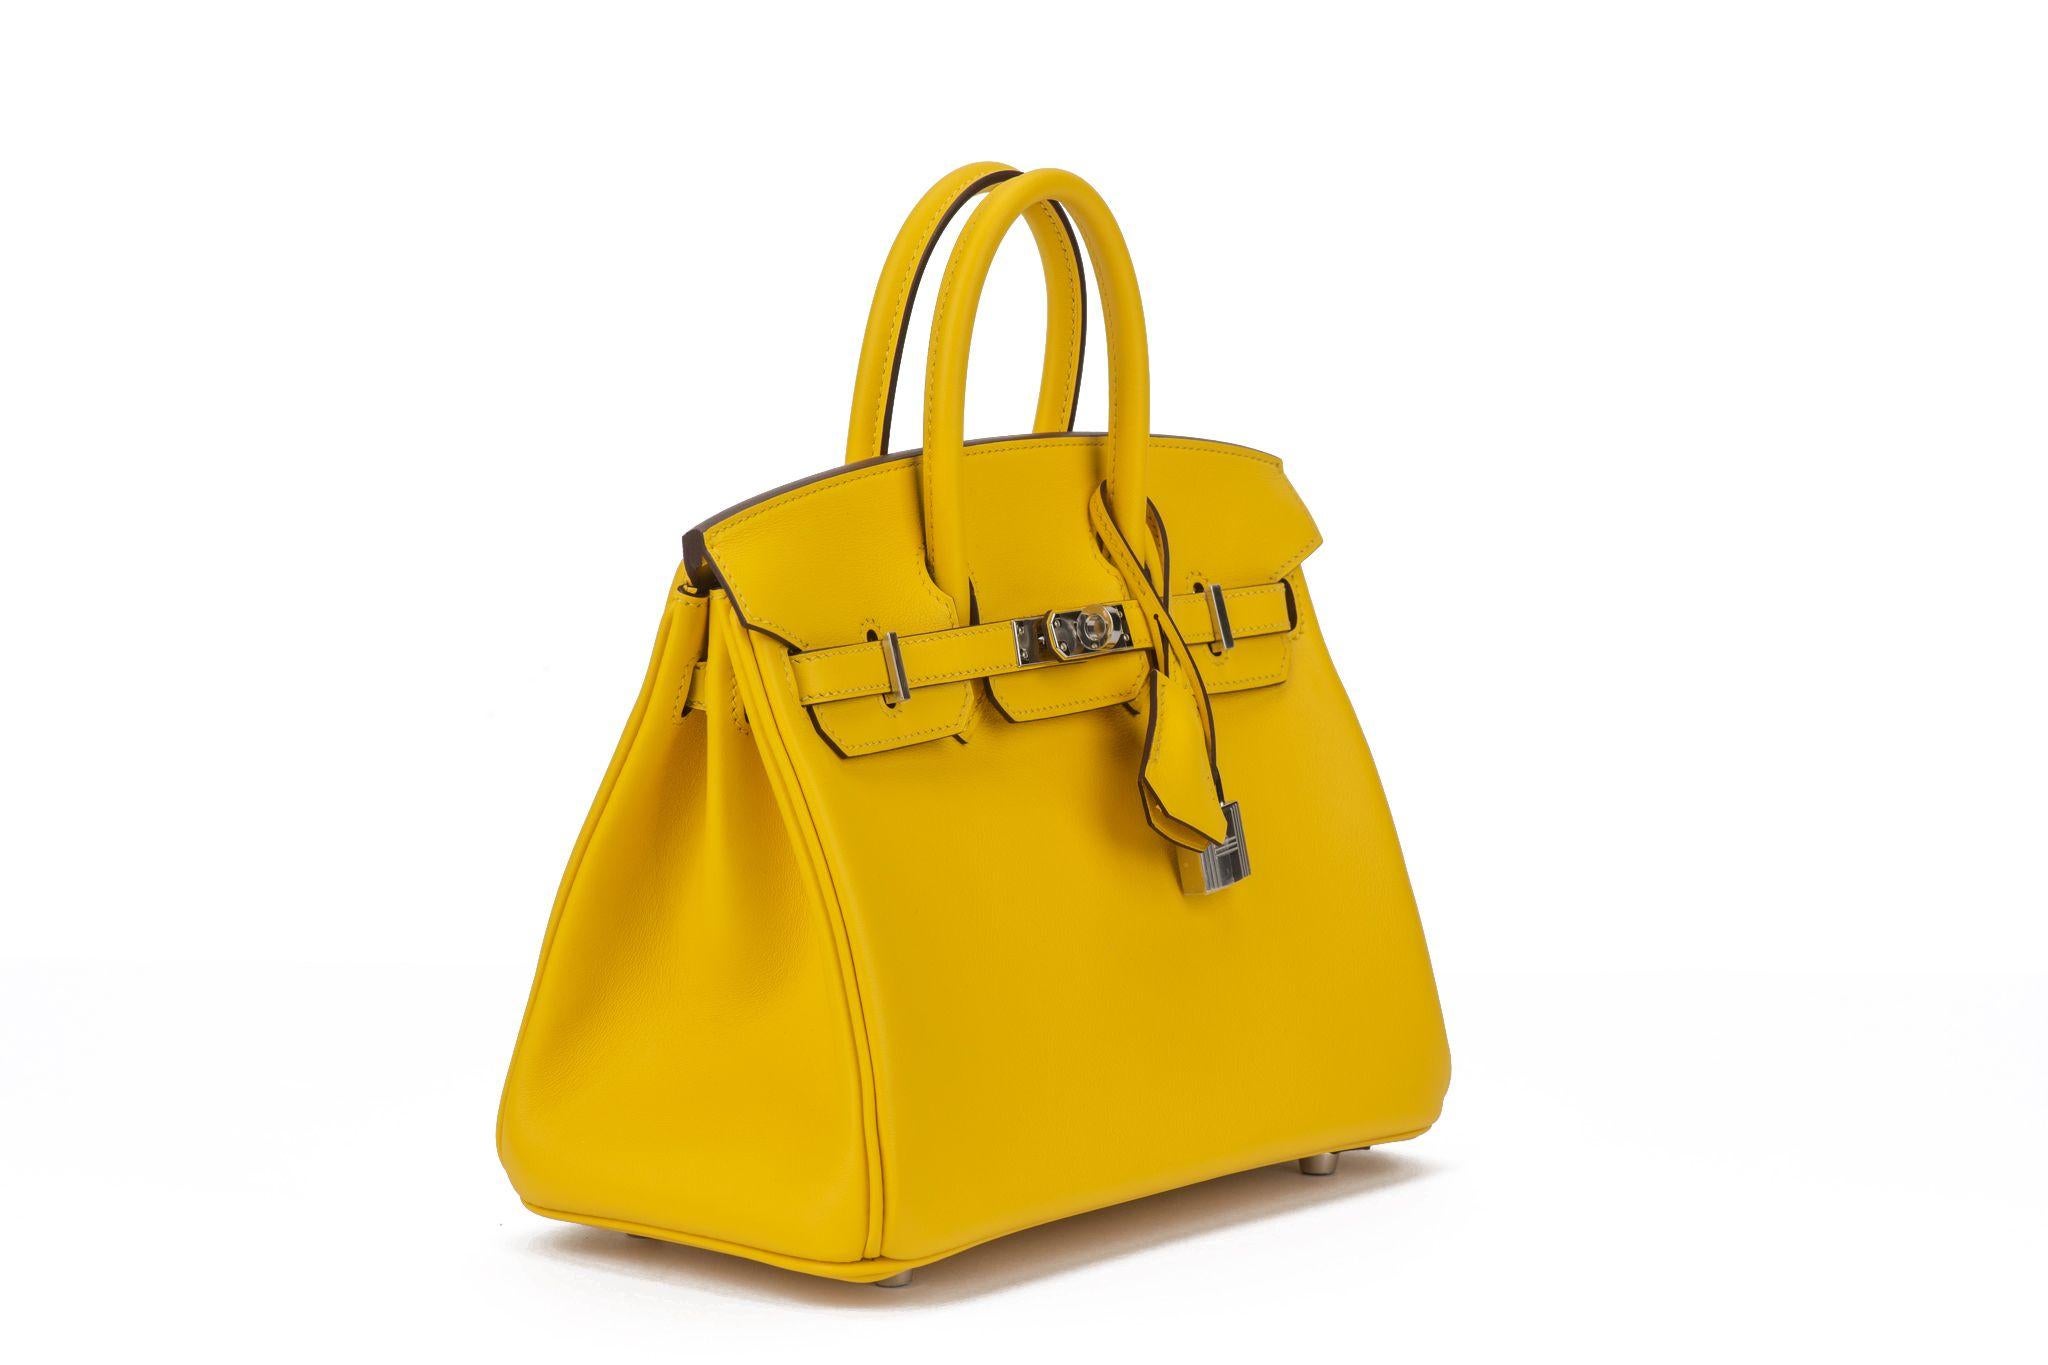 Hermès Birkin 25 bag made of swift leather in Jaune Naples color. The bag comes with silver palladium hardware. Date stamp B for 2023.  The item is new and comes with the original clochette, tirette, lock, 2 keys, dust cover, rain jacket, box.